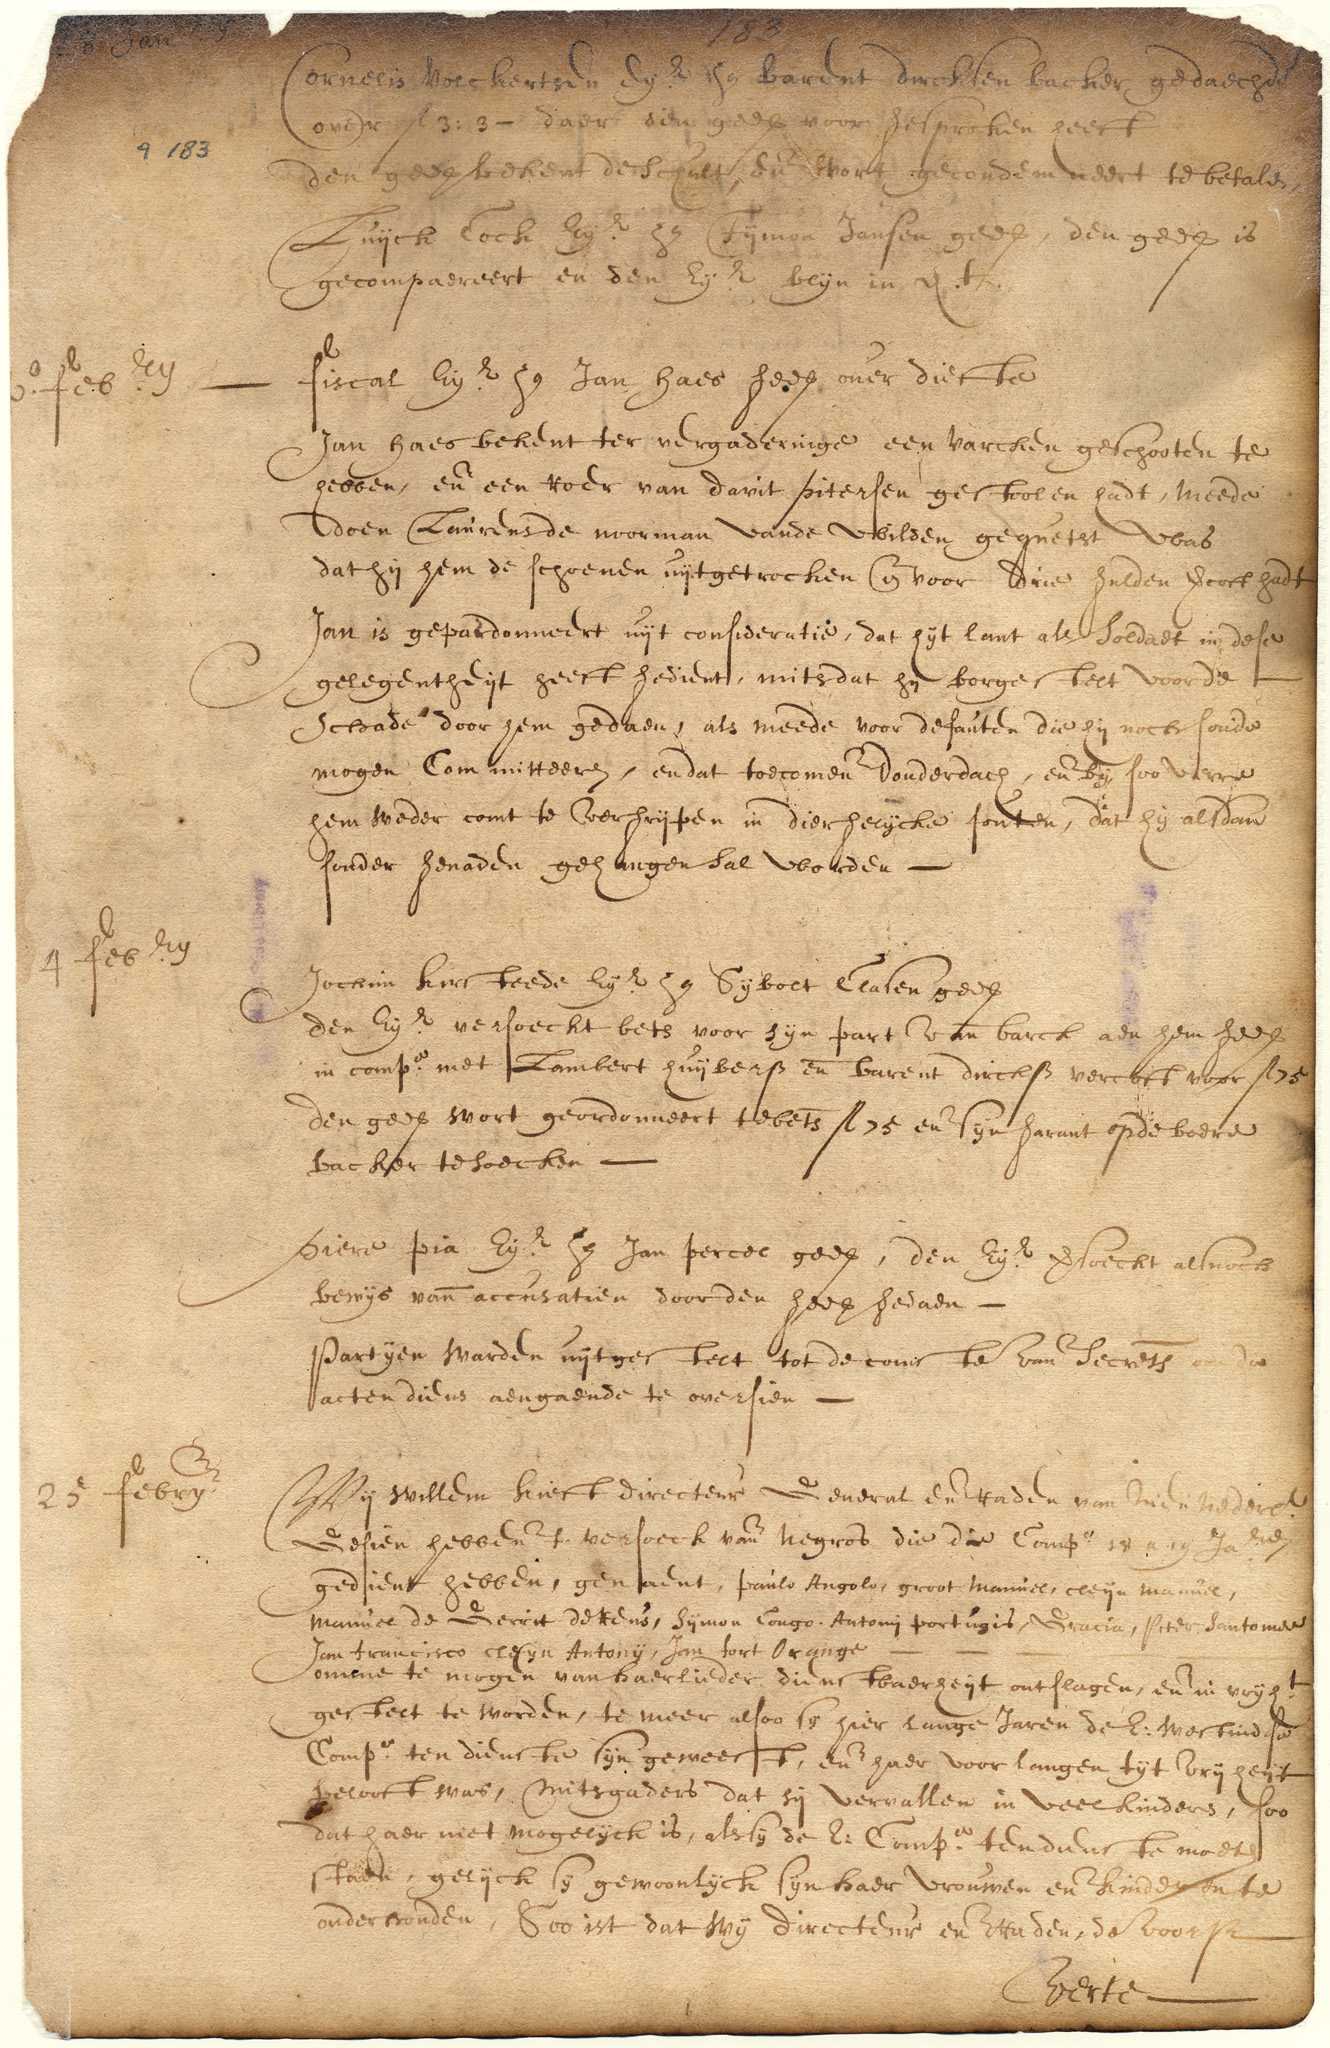 Image of document from New Amsterdam Council